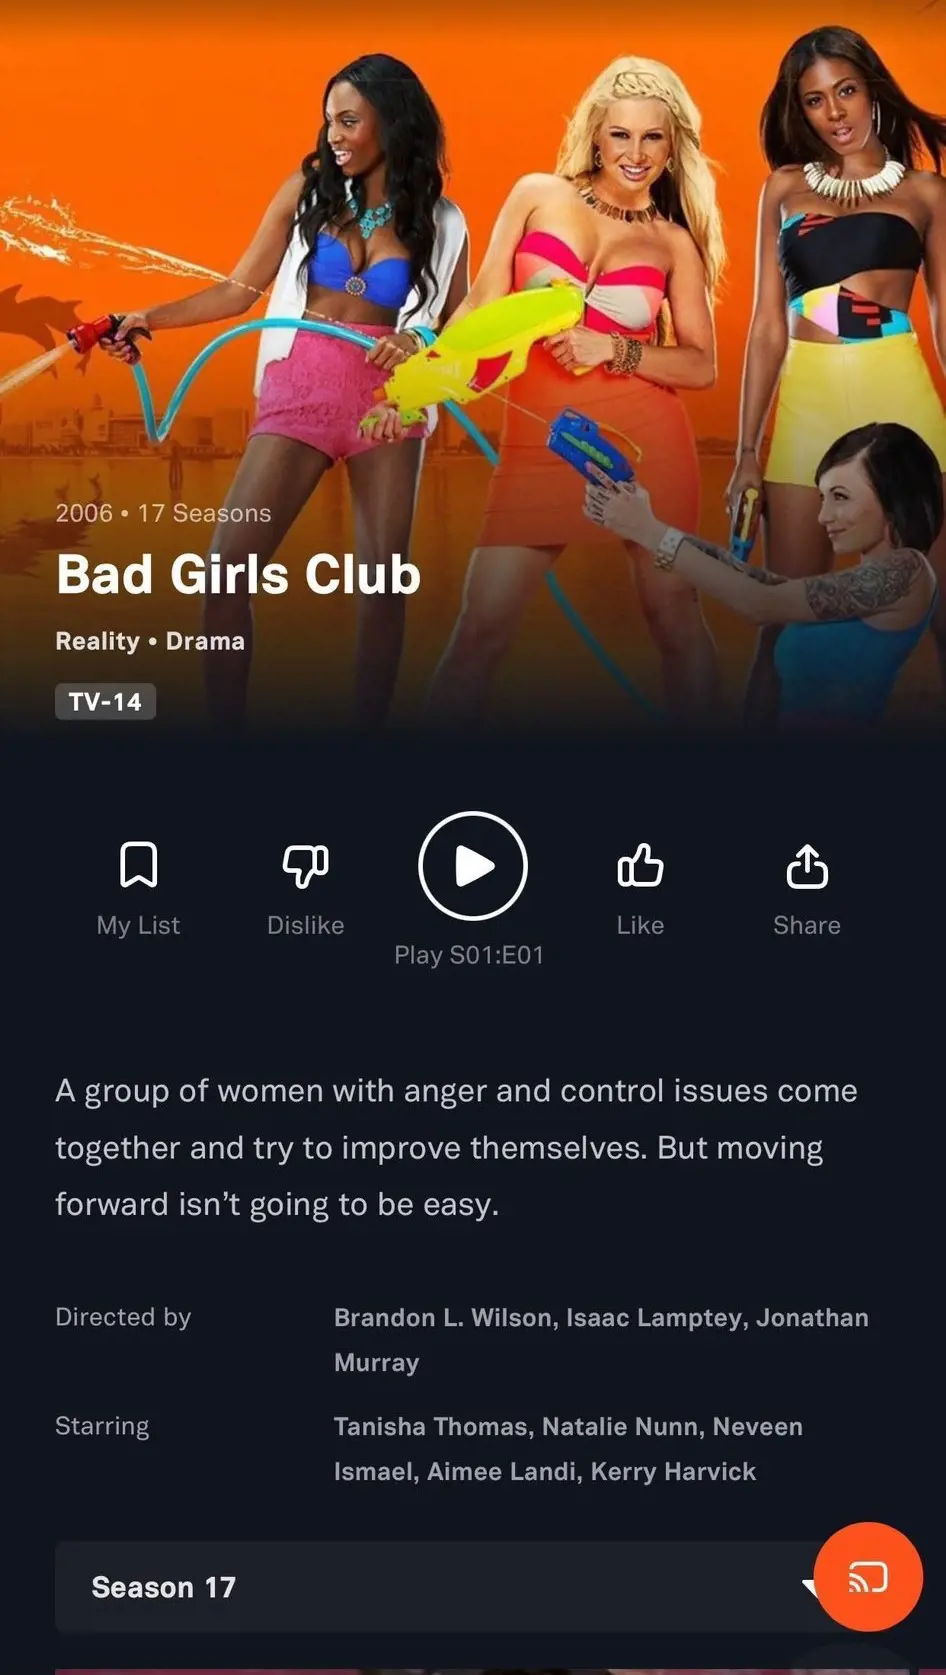 Bad Girls Club, a 2006 series is now available to watch for free on Tubi.